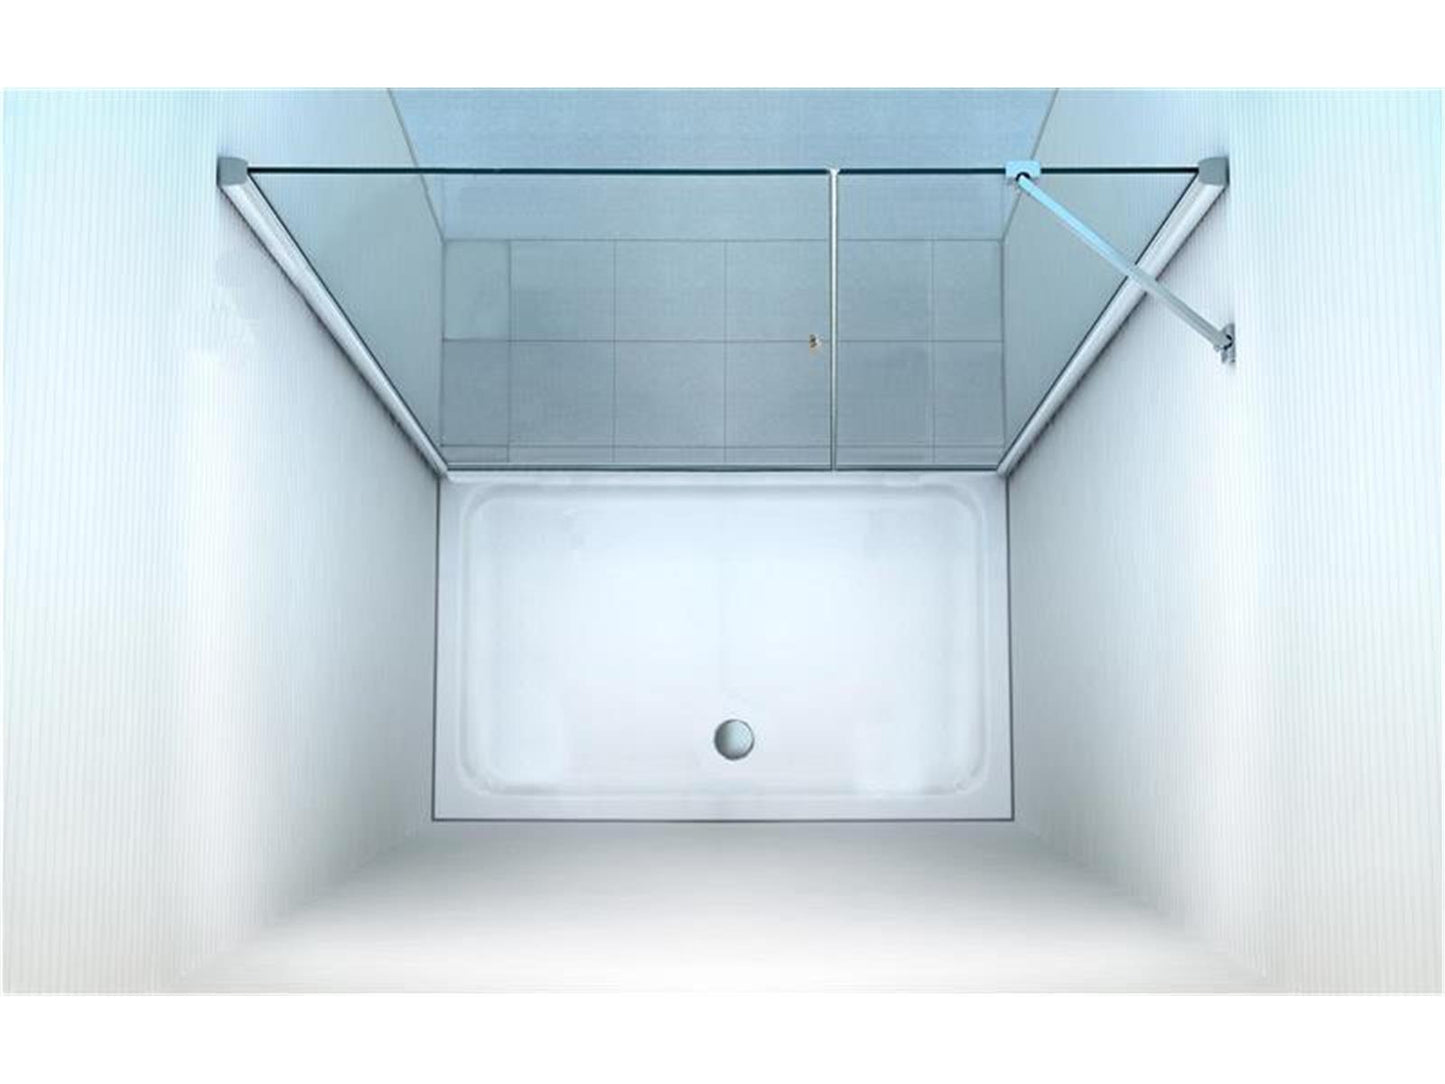 GlasHomeCenter - Florida niche cabin (175 x 195 cm) - 8mm toughened safety glass - without shower tray